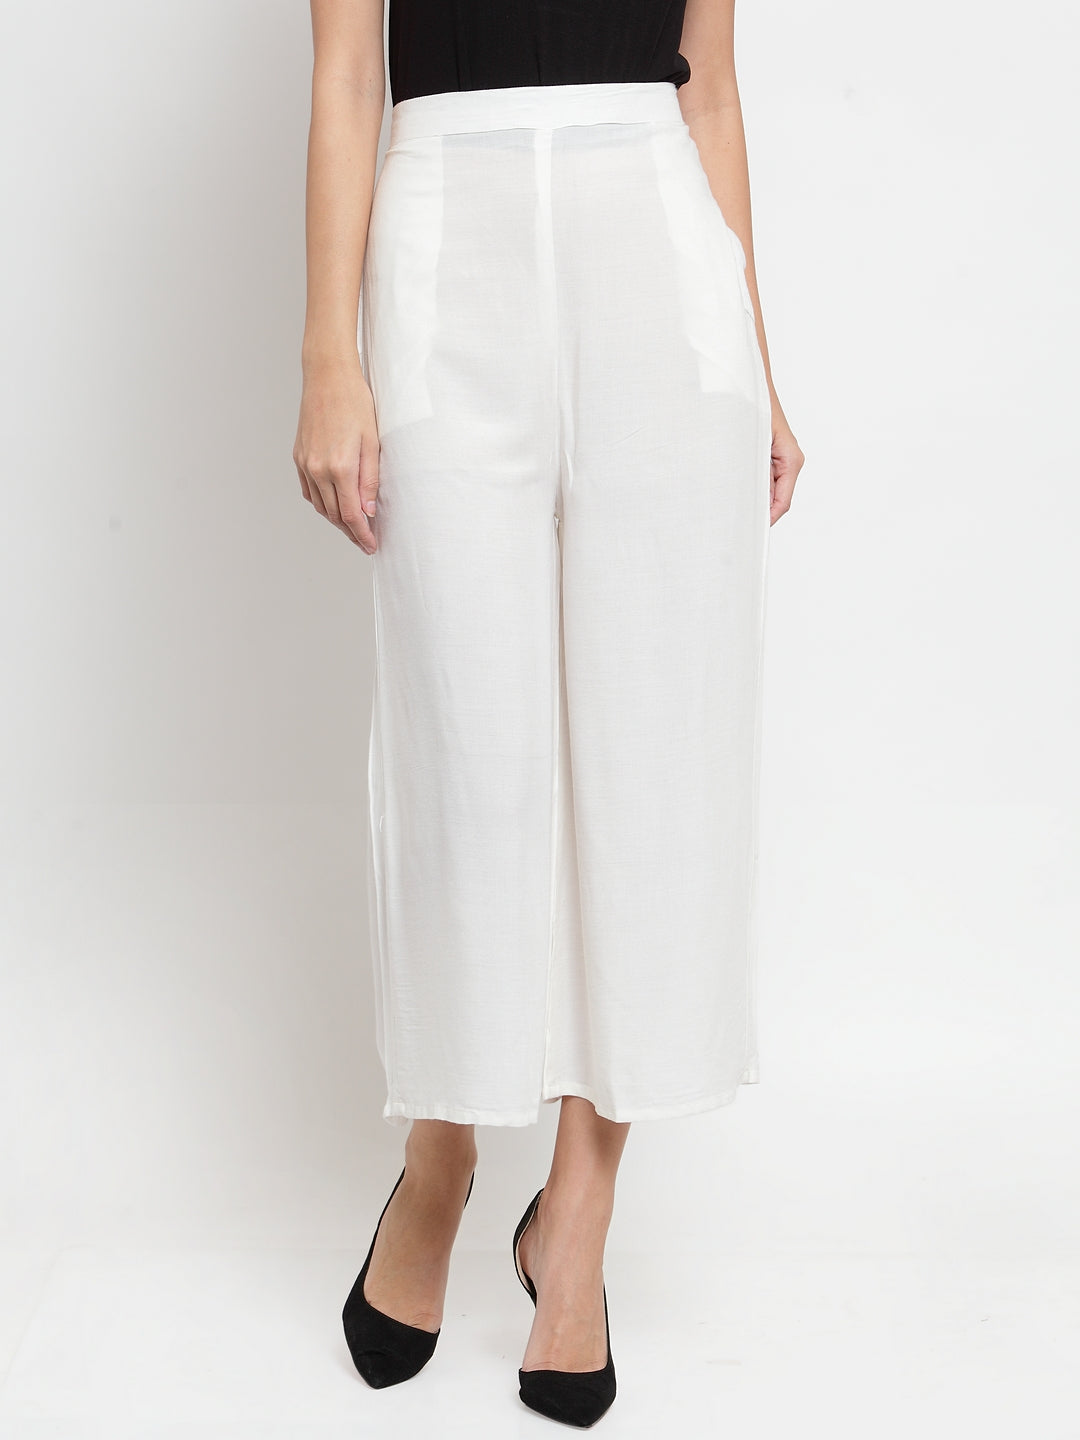 Clora Off-White Solid Rayon Culottes